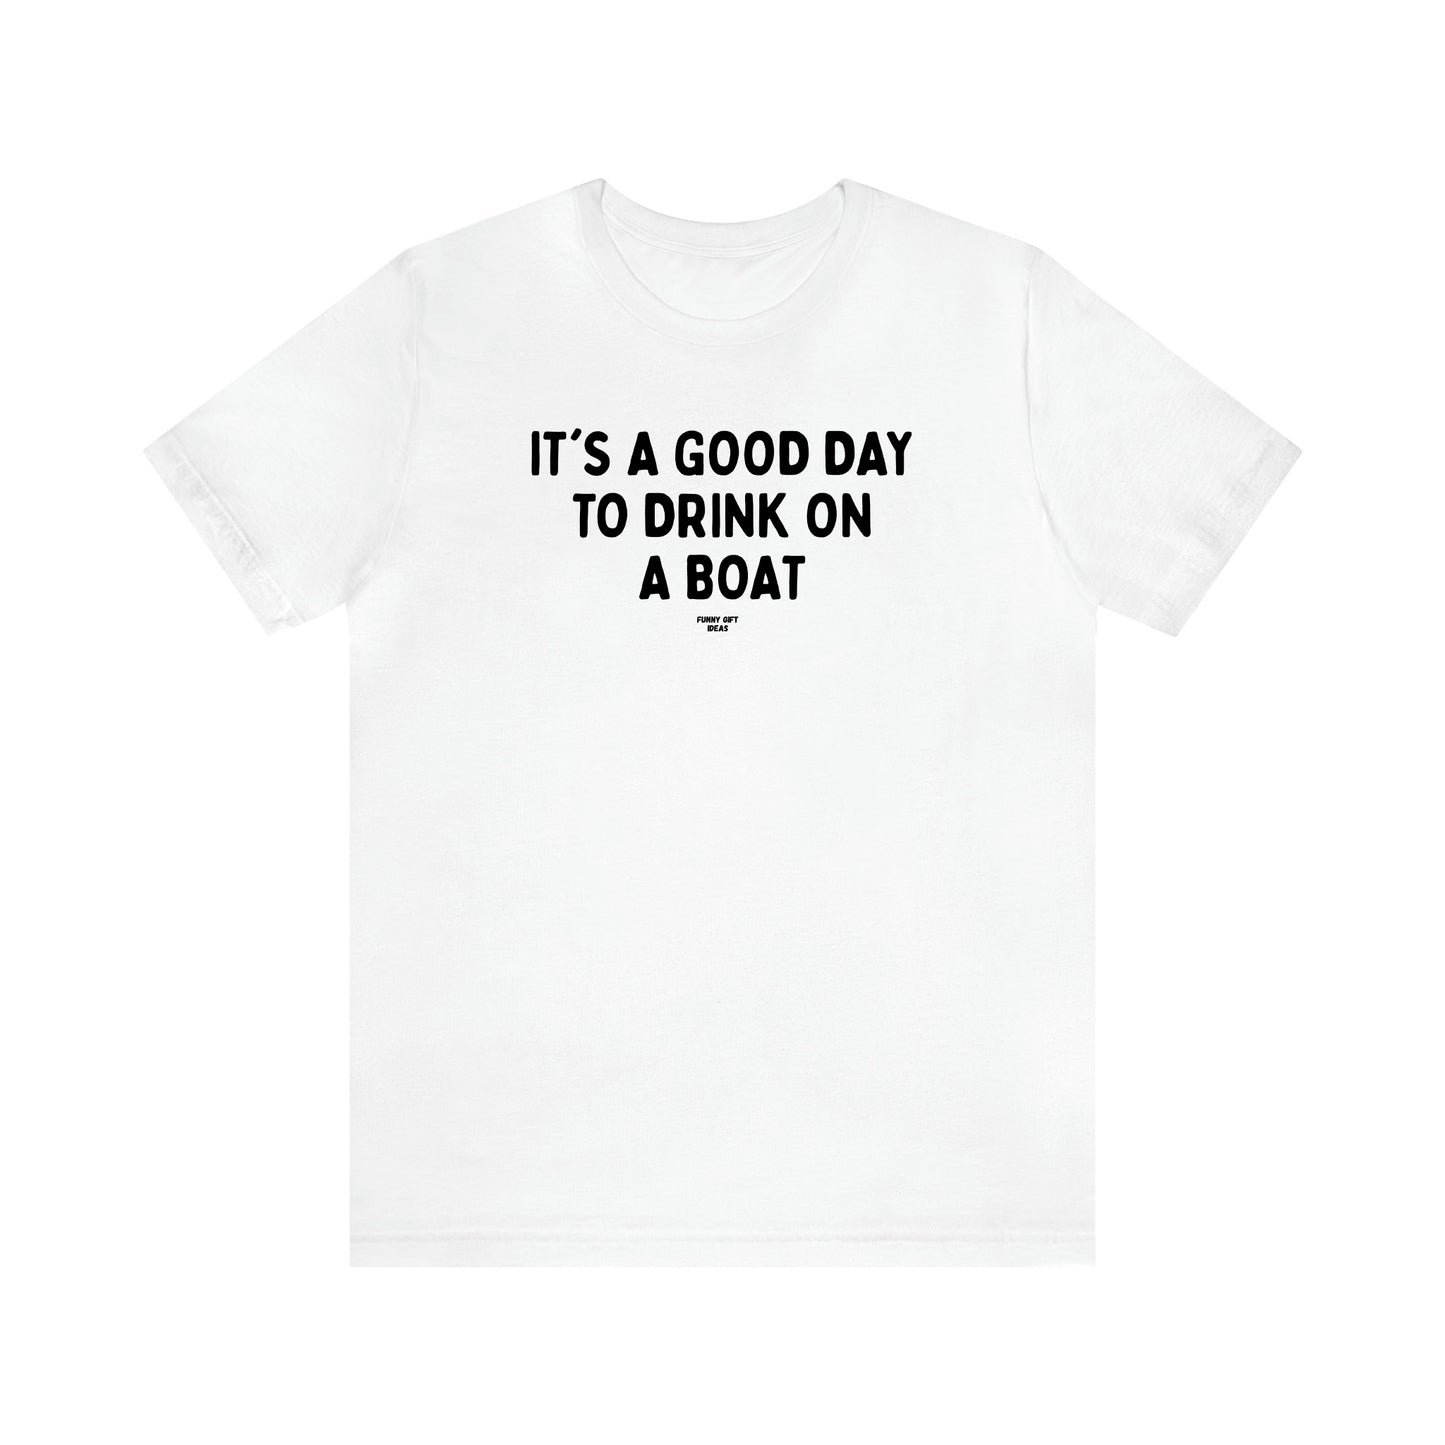 Men's T Shirts It's a Good Day to Drink on a Boat - Funny Gift Ideas